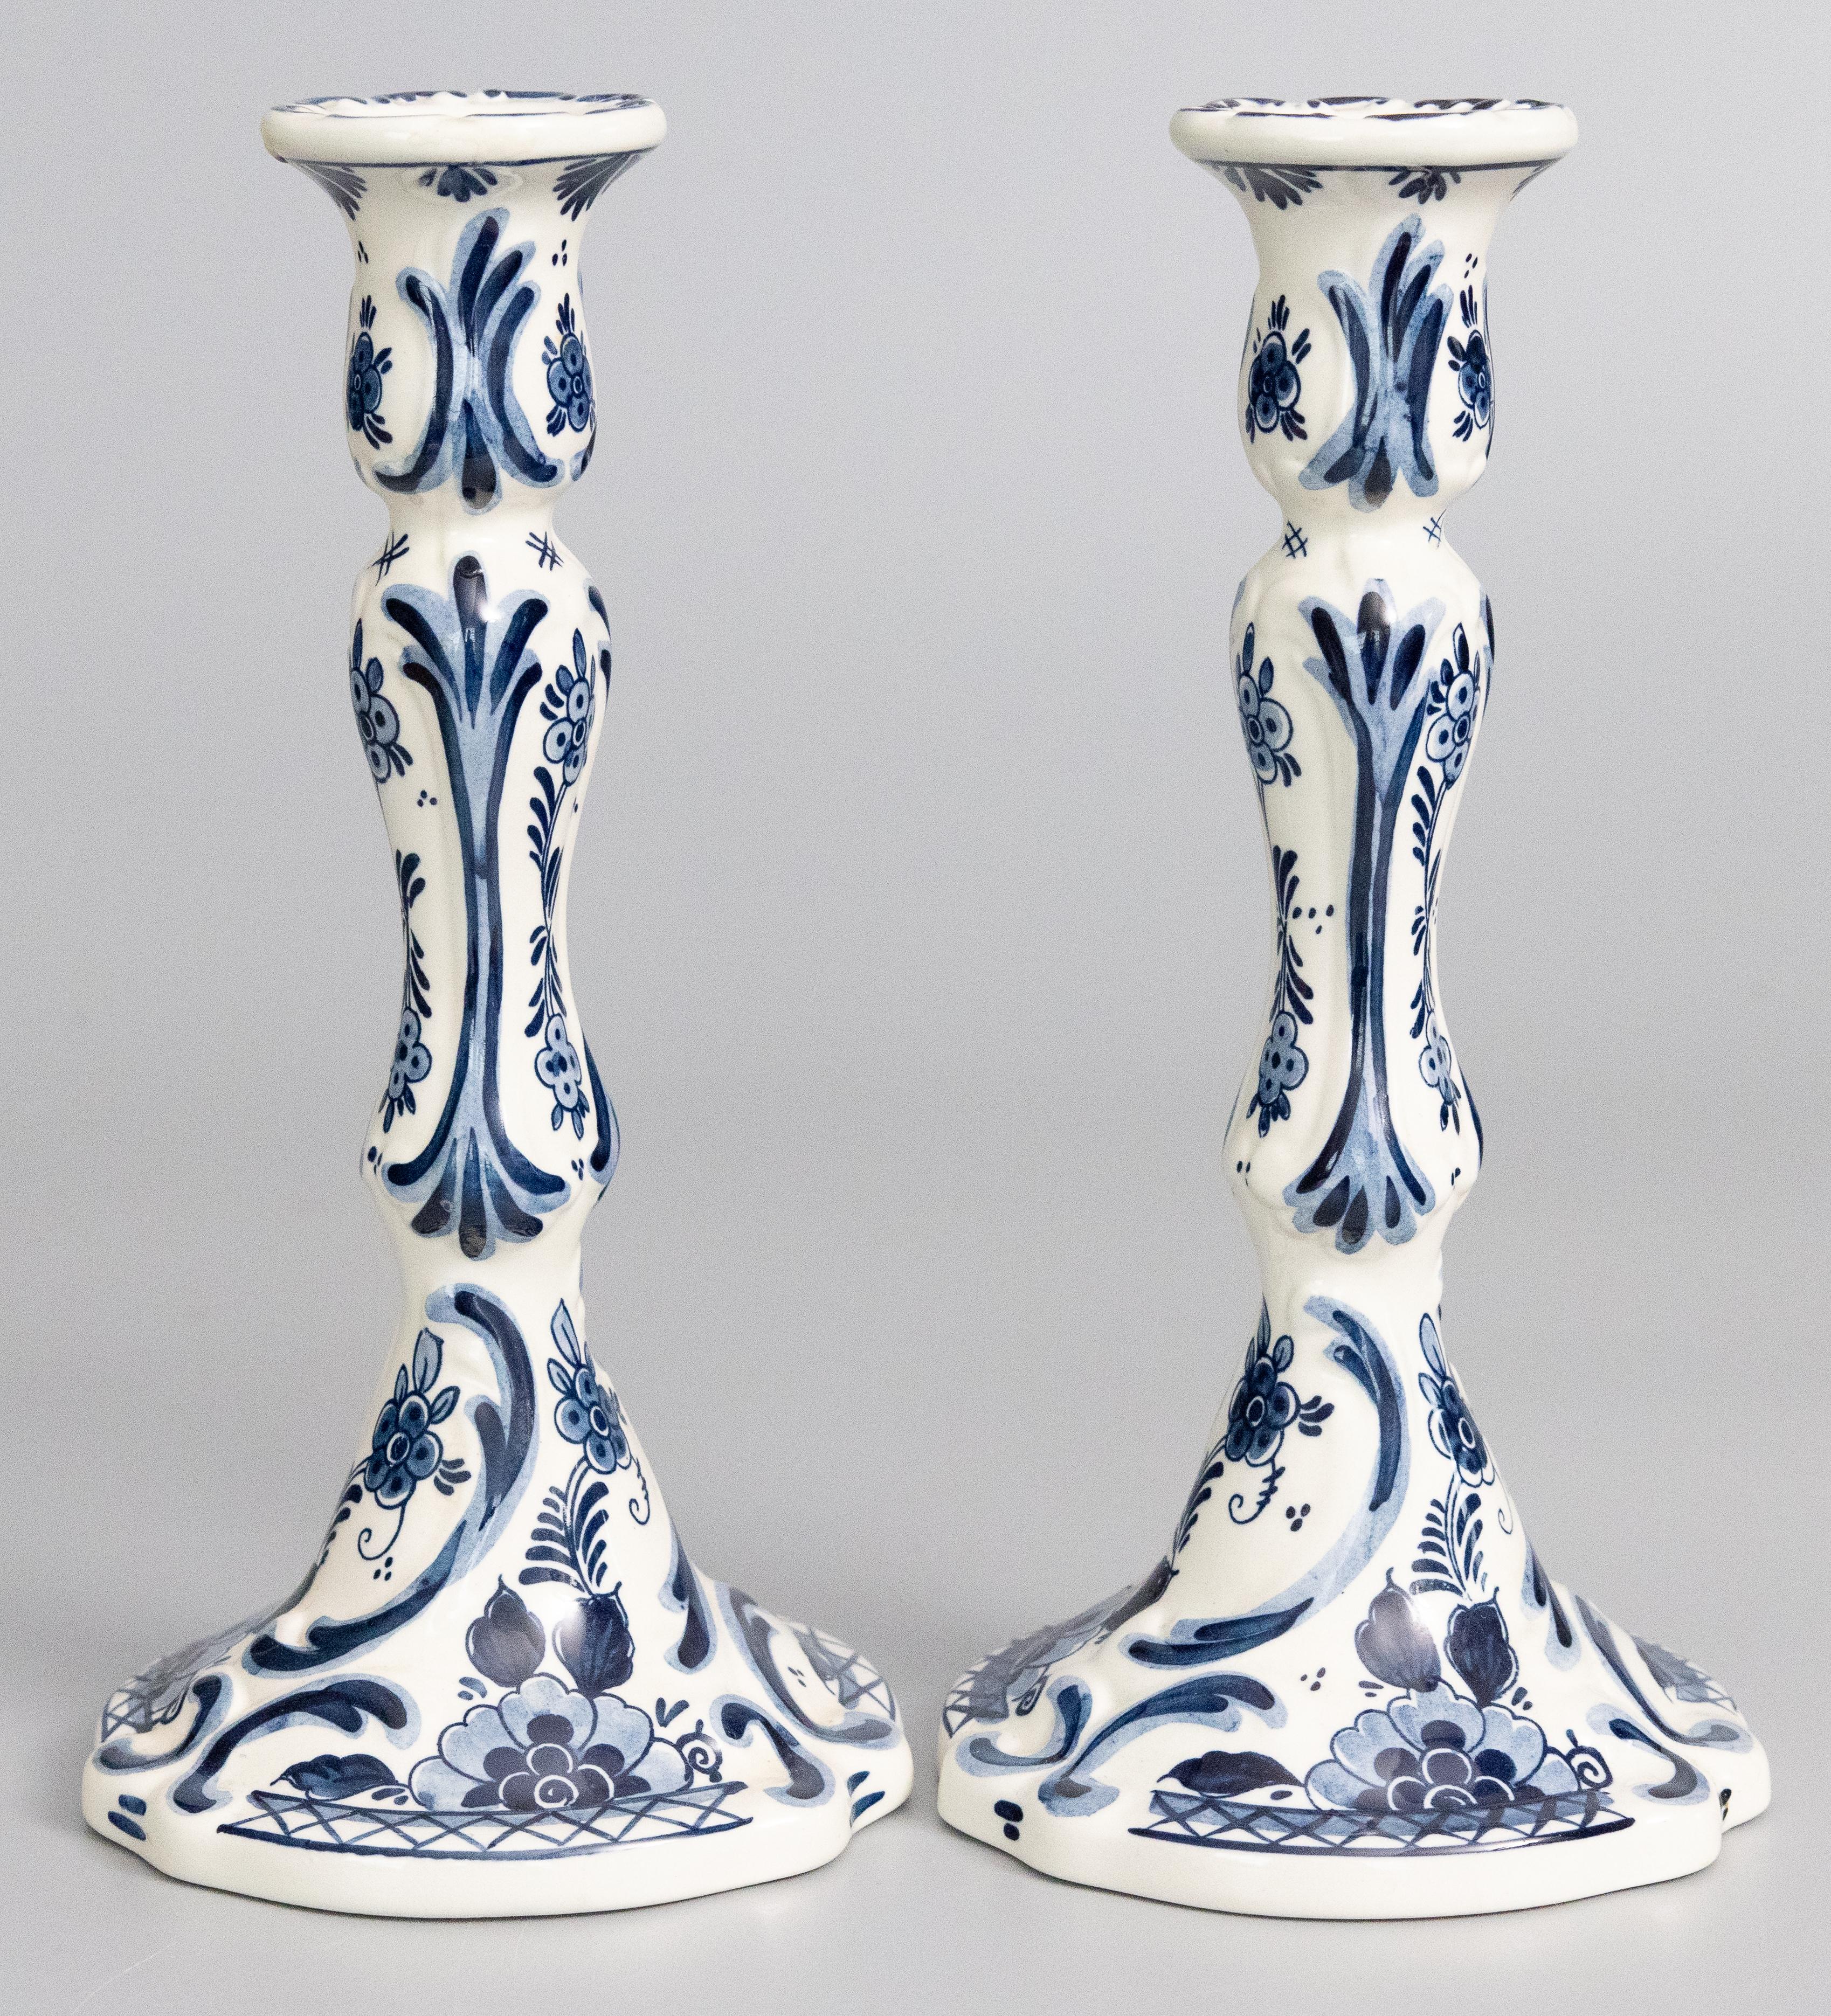 A lovely pair of Mid-Century Dutch Delft faience candlesticks. Marked 